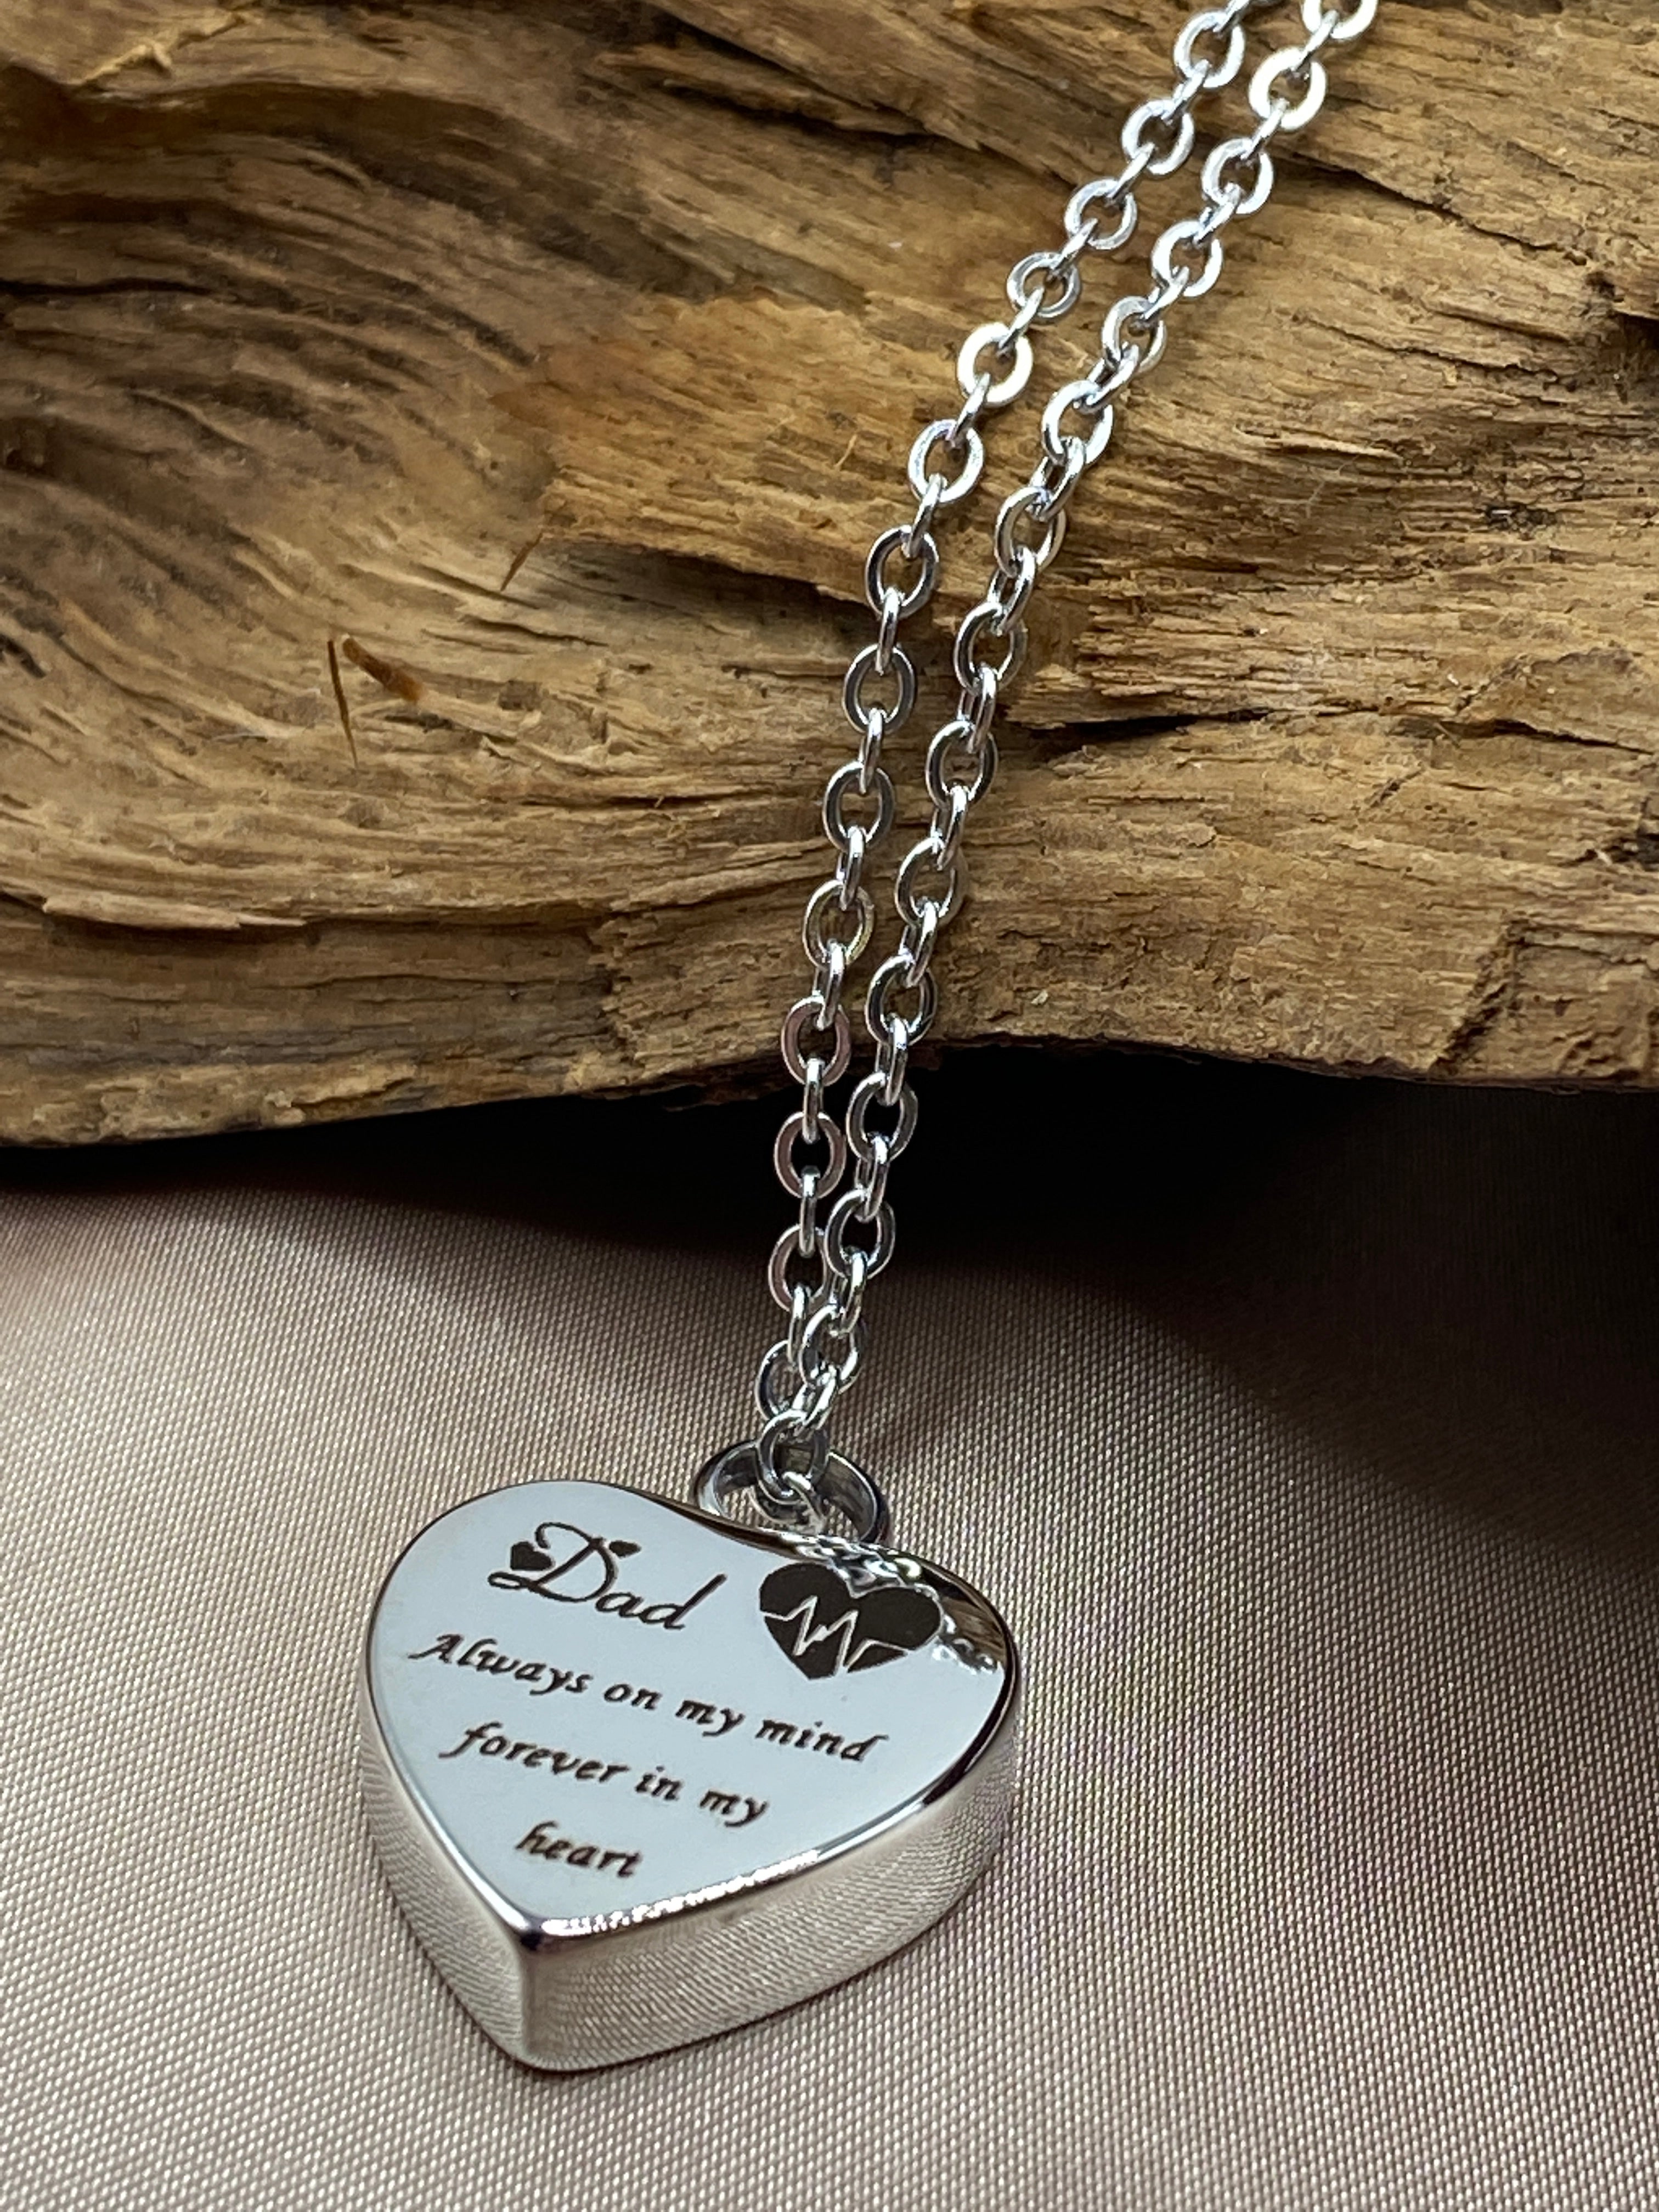 Cremation Jewelry Stainless Steel Angel Wing Memorial Urn Necklace Heart  Pendant for Ashes, Sentimental Ash Necklace for Dad Mom Grandma Nana Papa  Keepsake Necklace, Forever In My Heart - Walmart.com